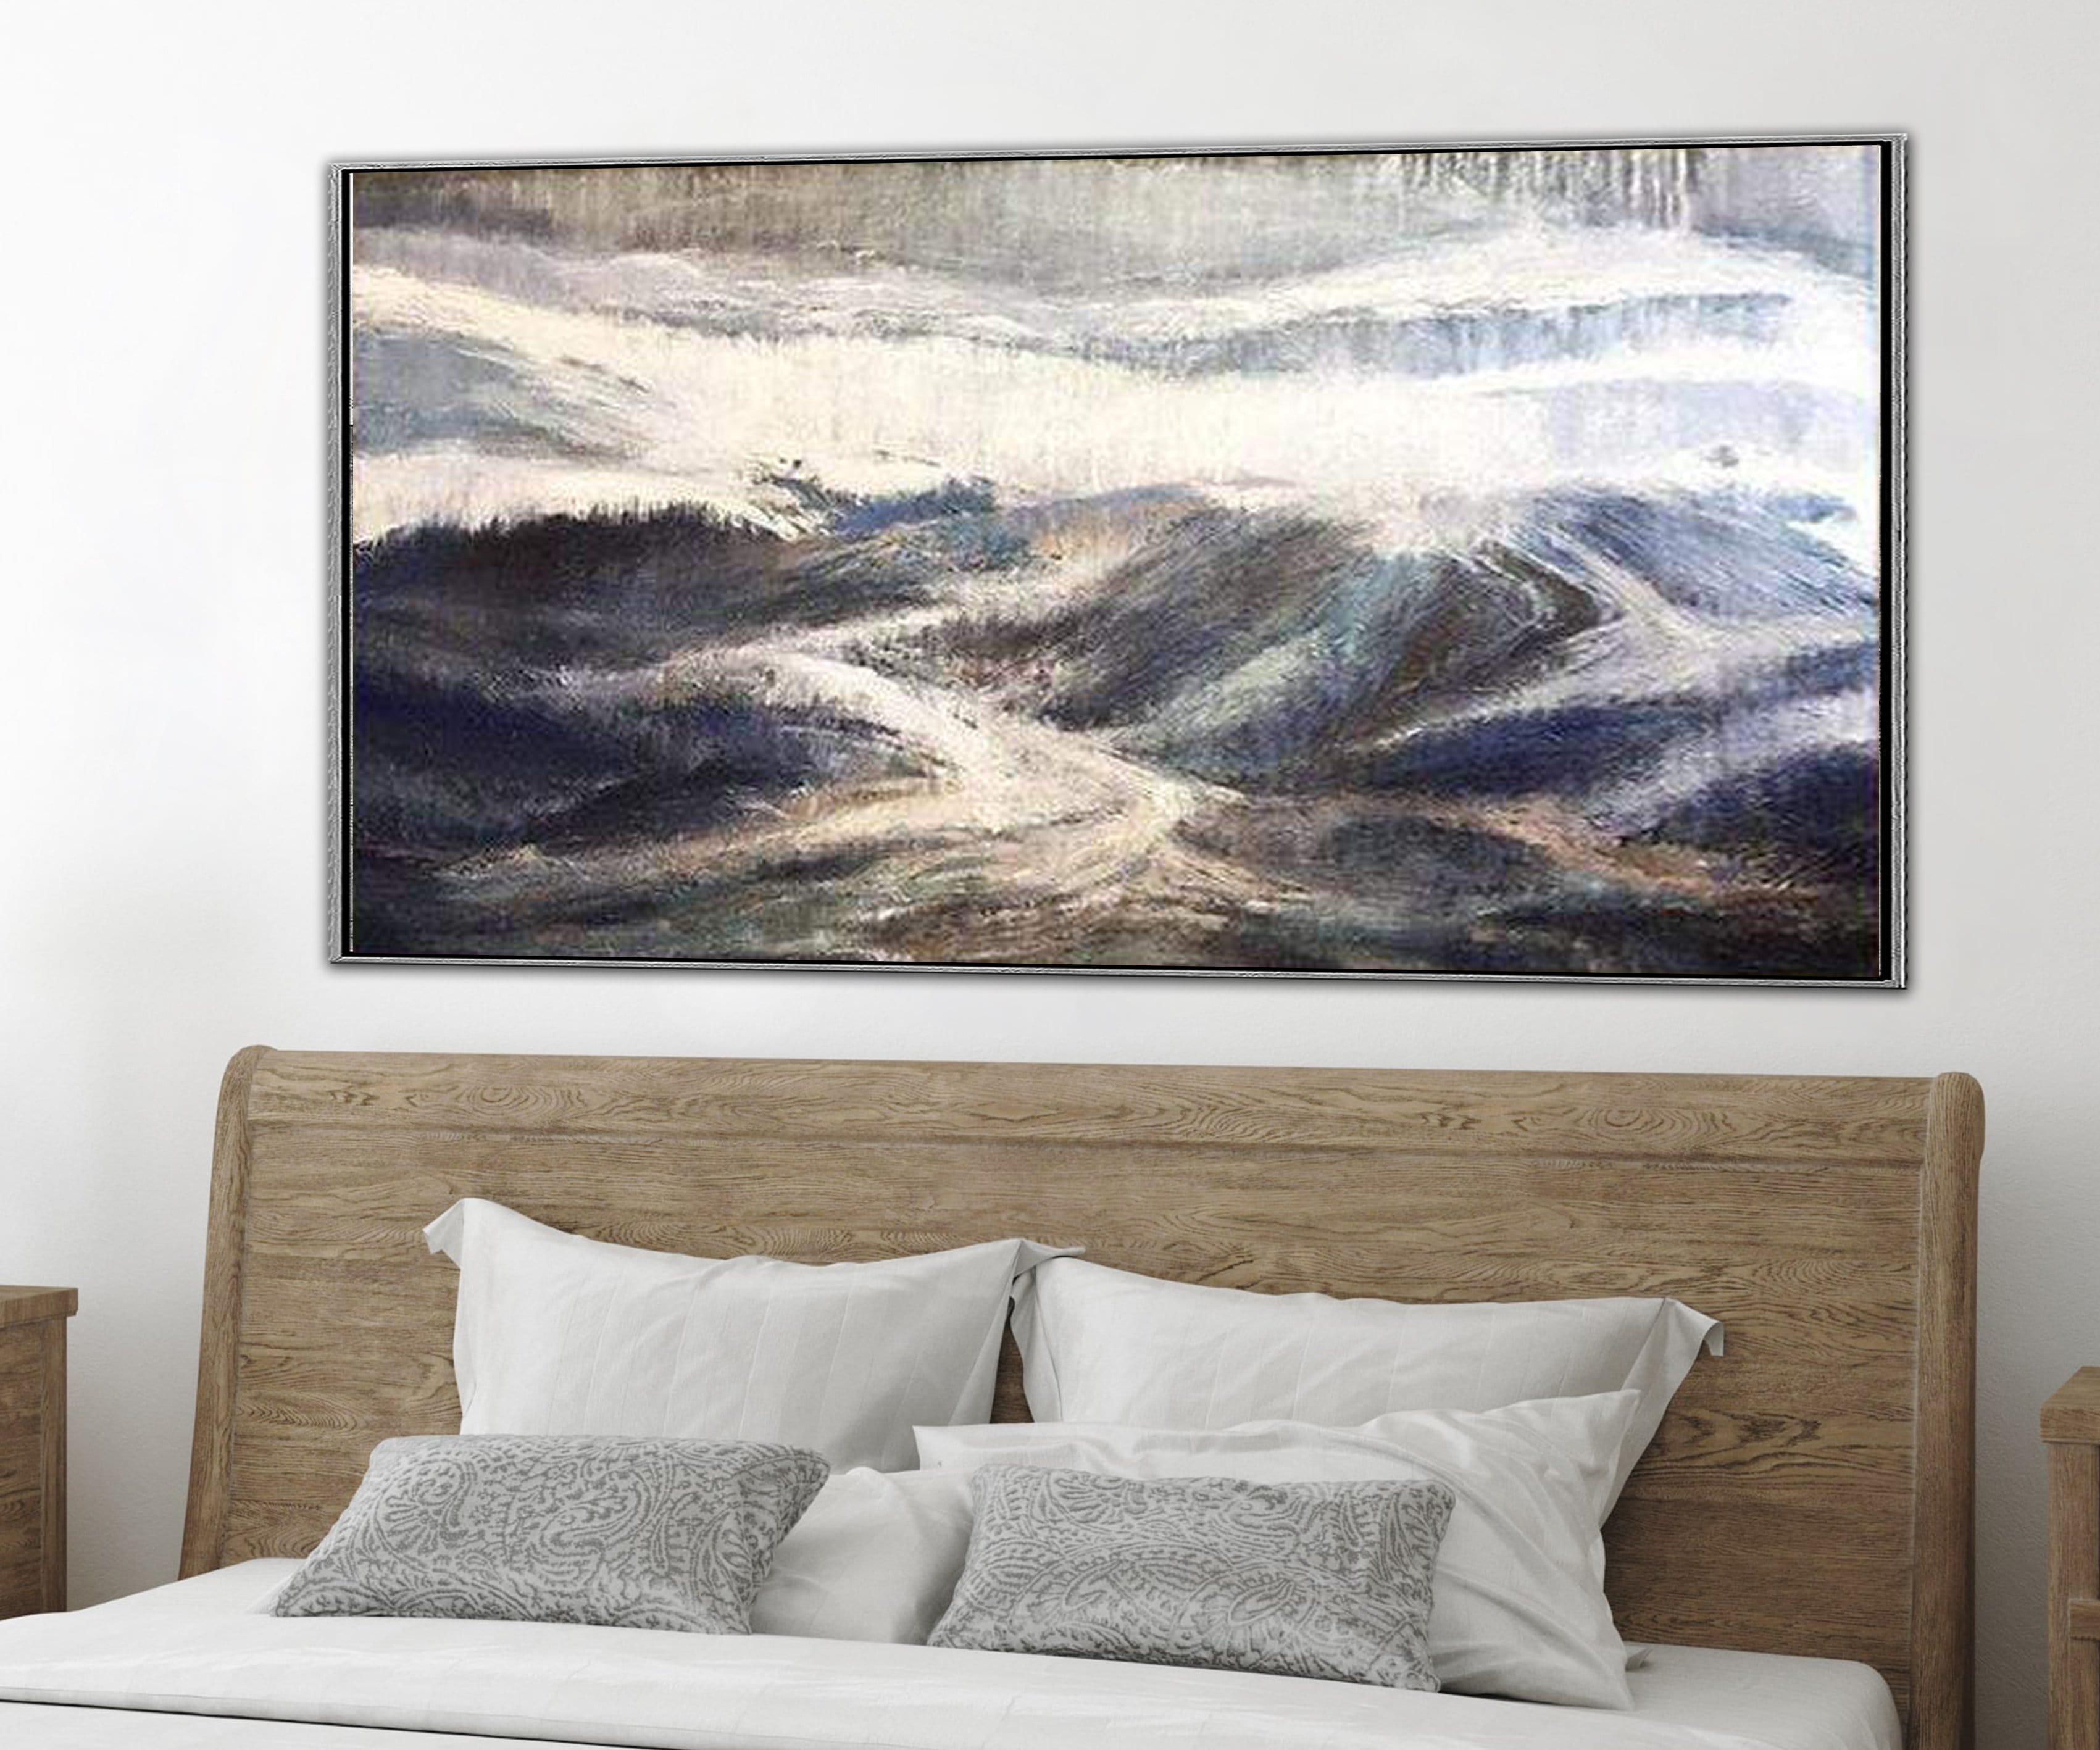 GREAT MOUNTAINS from $303